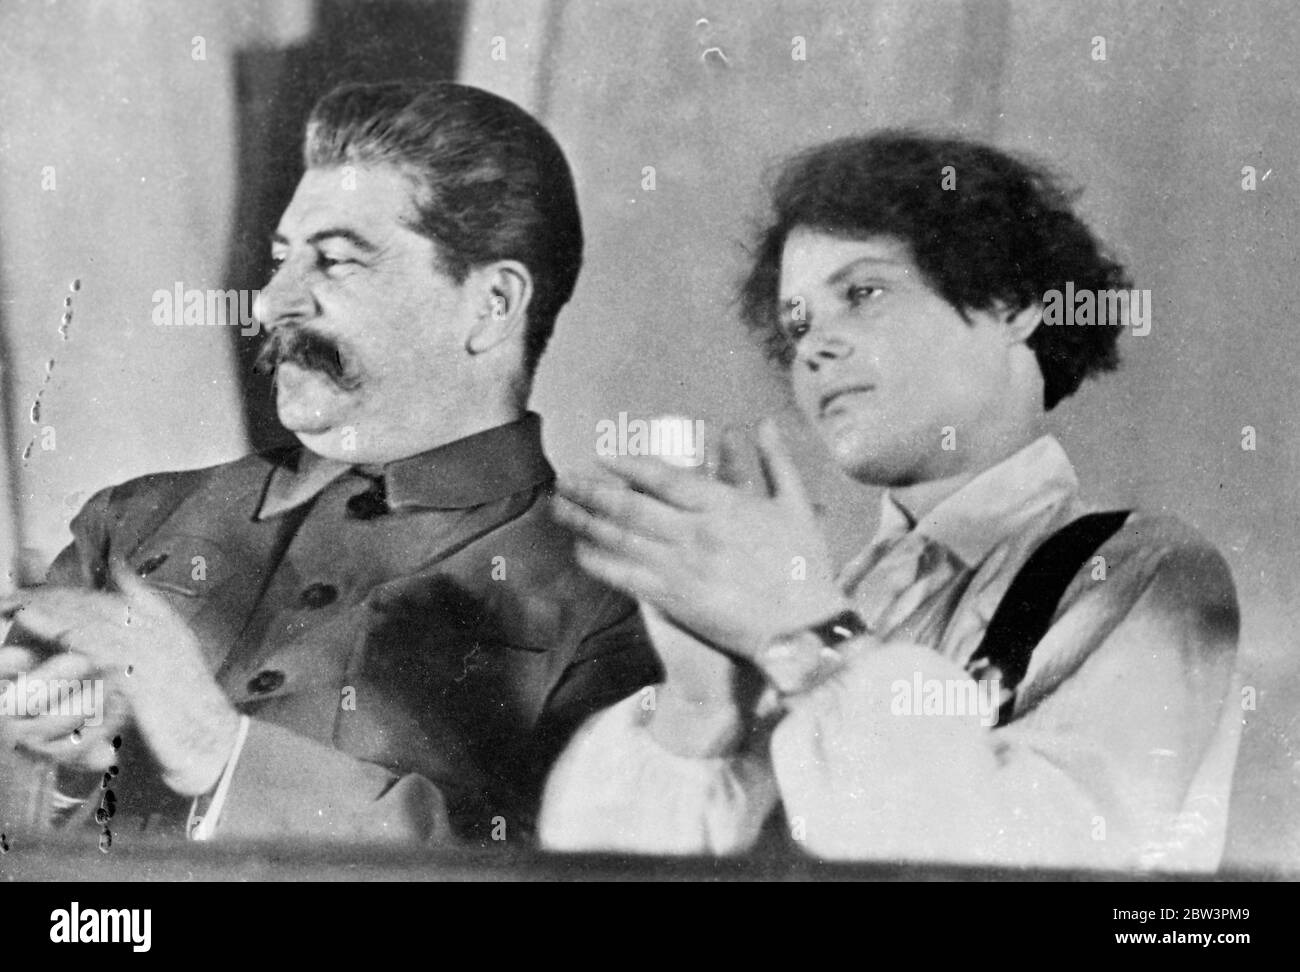 The leader smiles , his disciples applause . Jospeh Stalin , virtual dictator of Soviet Russia and idol of millions of workers , quietly smiles as he applauds with Mlle Maria Demchenko , one of his most ardent disciples , during the Tenth Congress of the Young Communist League at the Kremlin in Moscow . Maria is famous throughout the Soviet Union for a promise she made to Stalin . She gave her word that in 1935 she would harvest a record crop on the sugar beet collective farm on which she is employed . In the autumn of that year she had apply fulfilled her promise and the movement she started Stock Photo